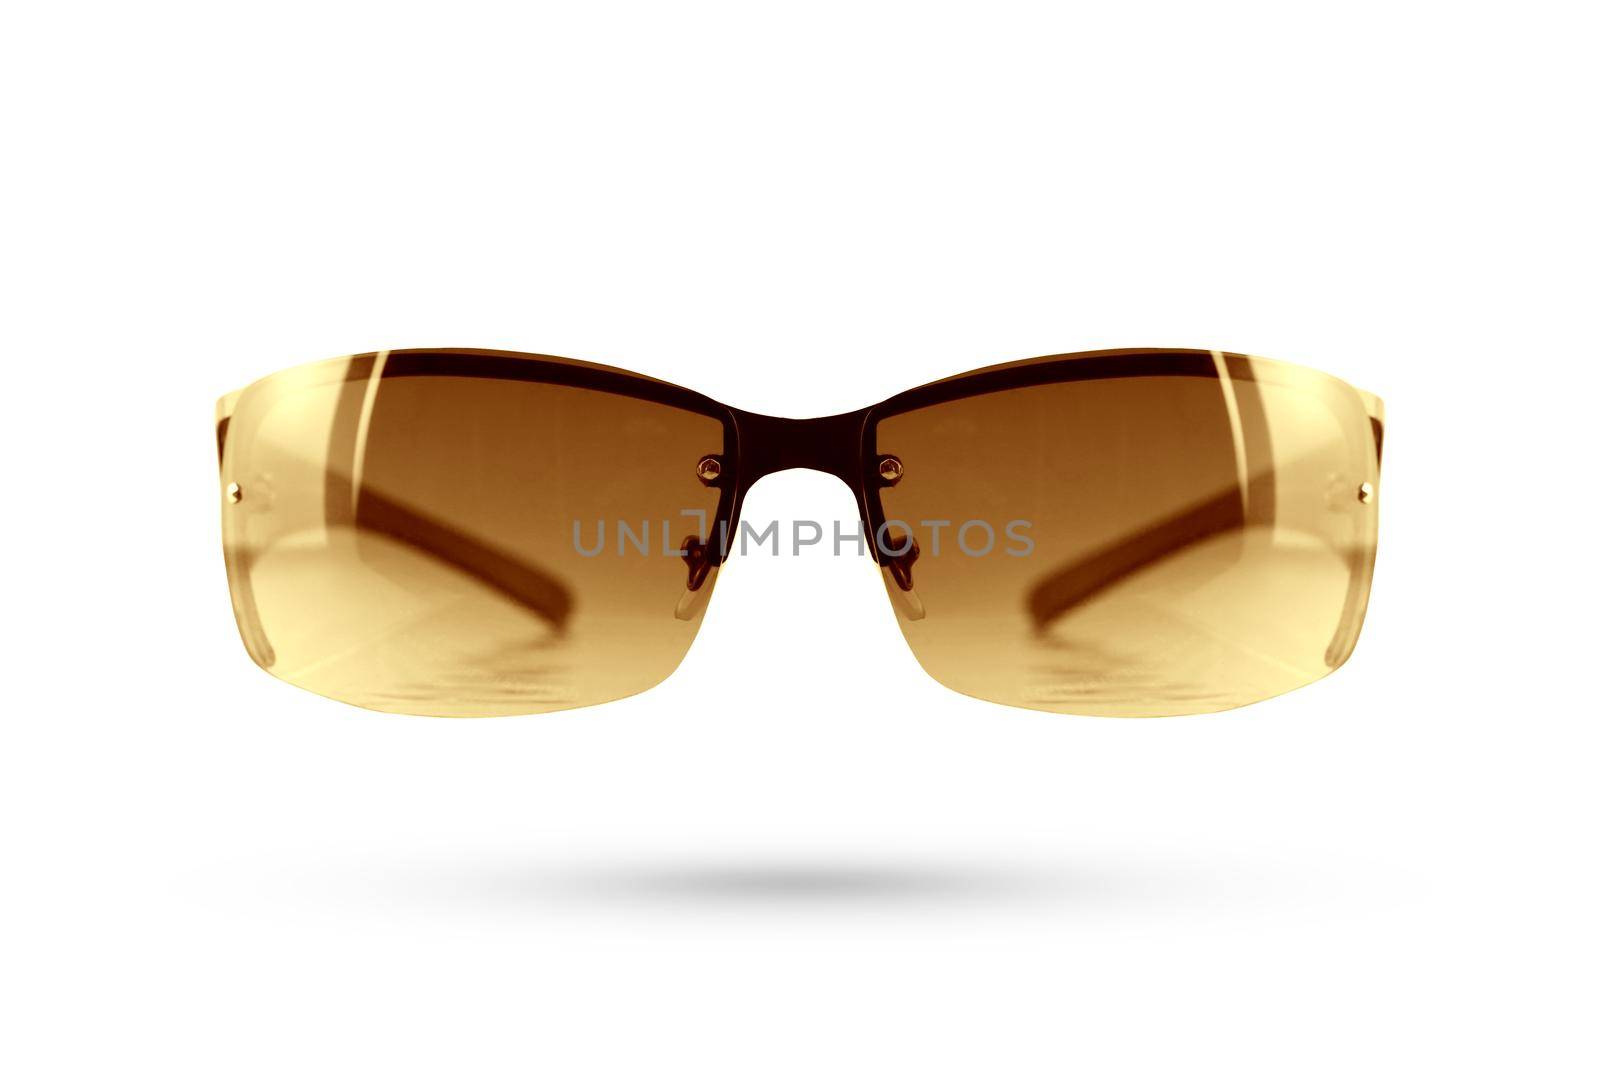 Sun glasses style isolated on white background. by jayzynism